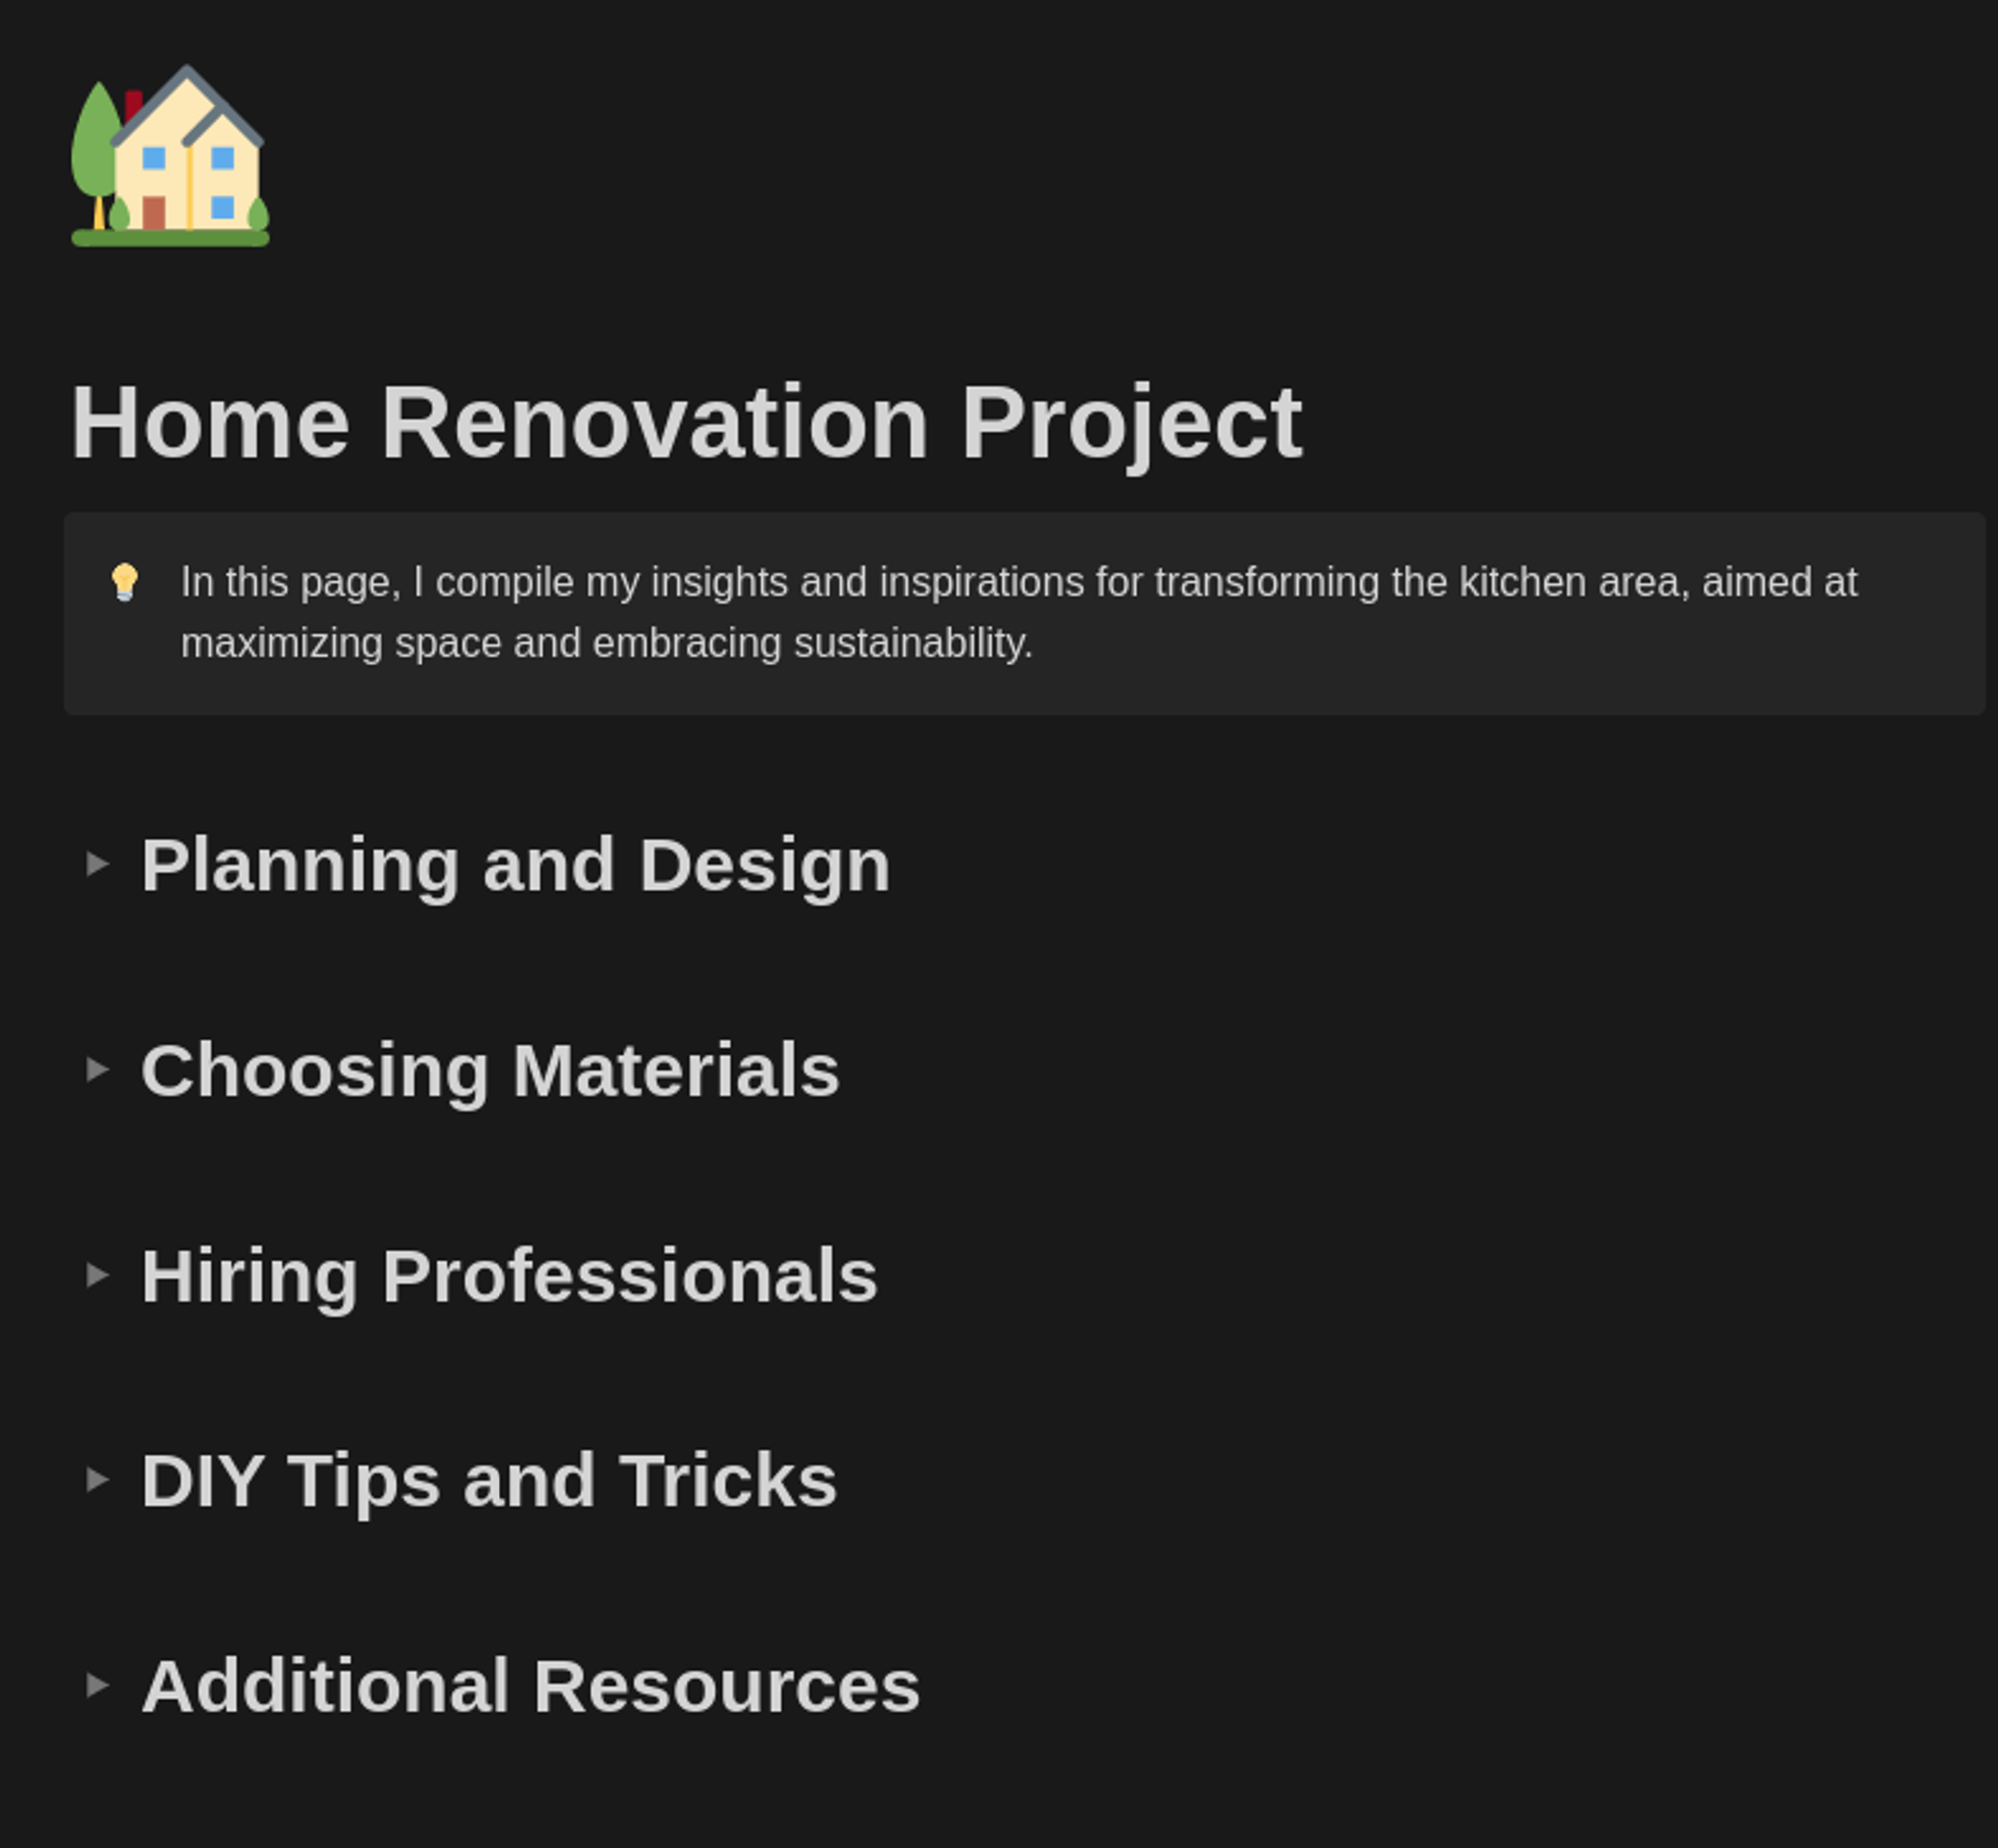 Home renovation project Notion page example